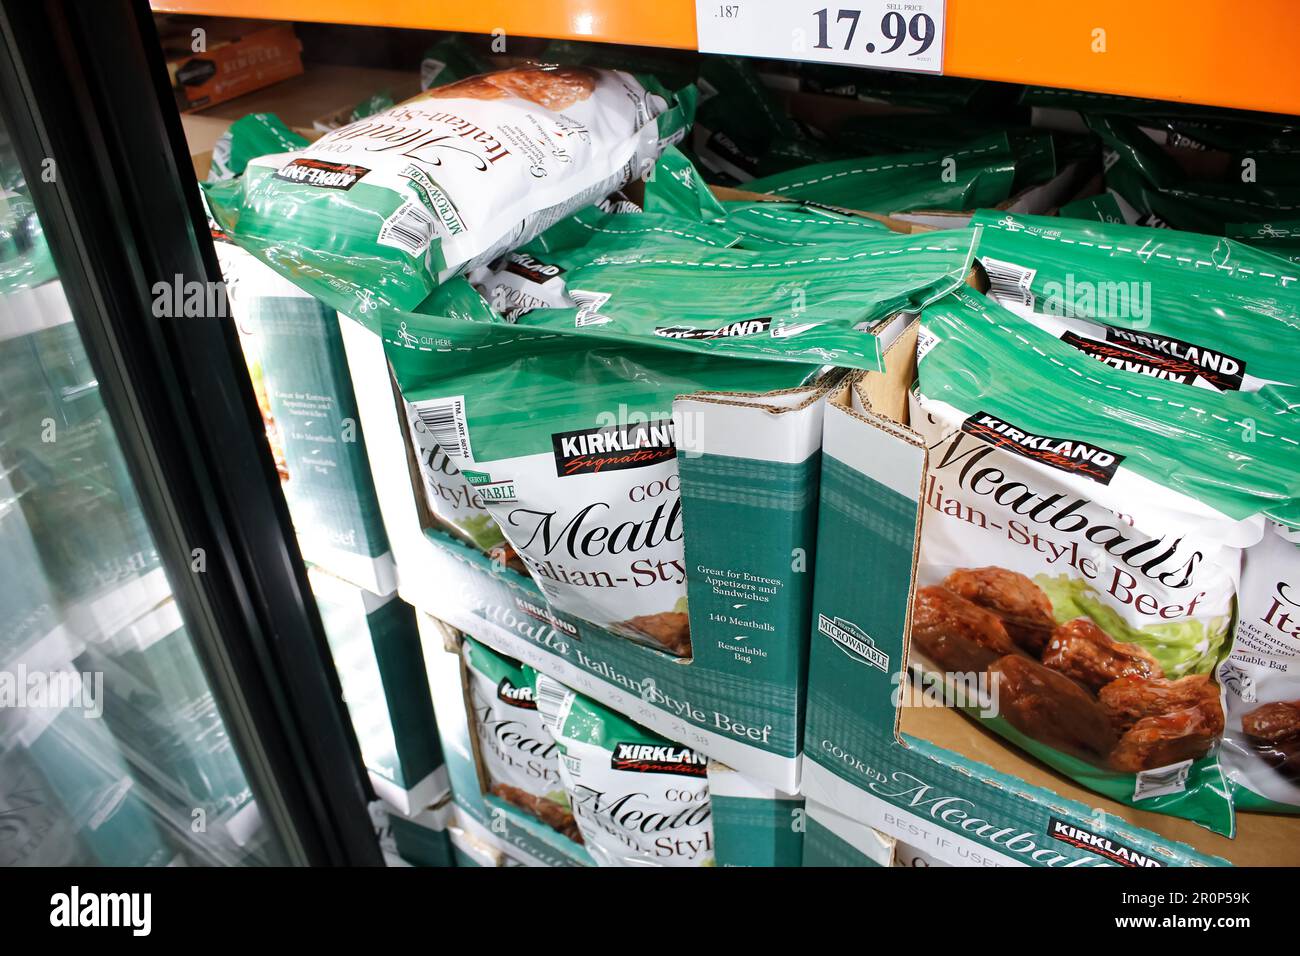 Los Angeles, California, United States - 10-25-2021: A view of several packages of Kirkland Signature meatballs, on display at a local Costco store. Stock Photo